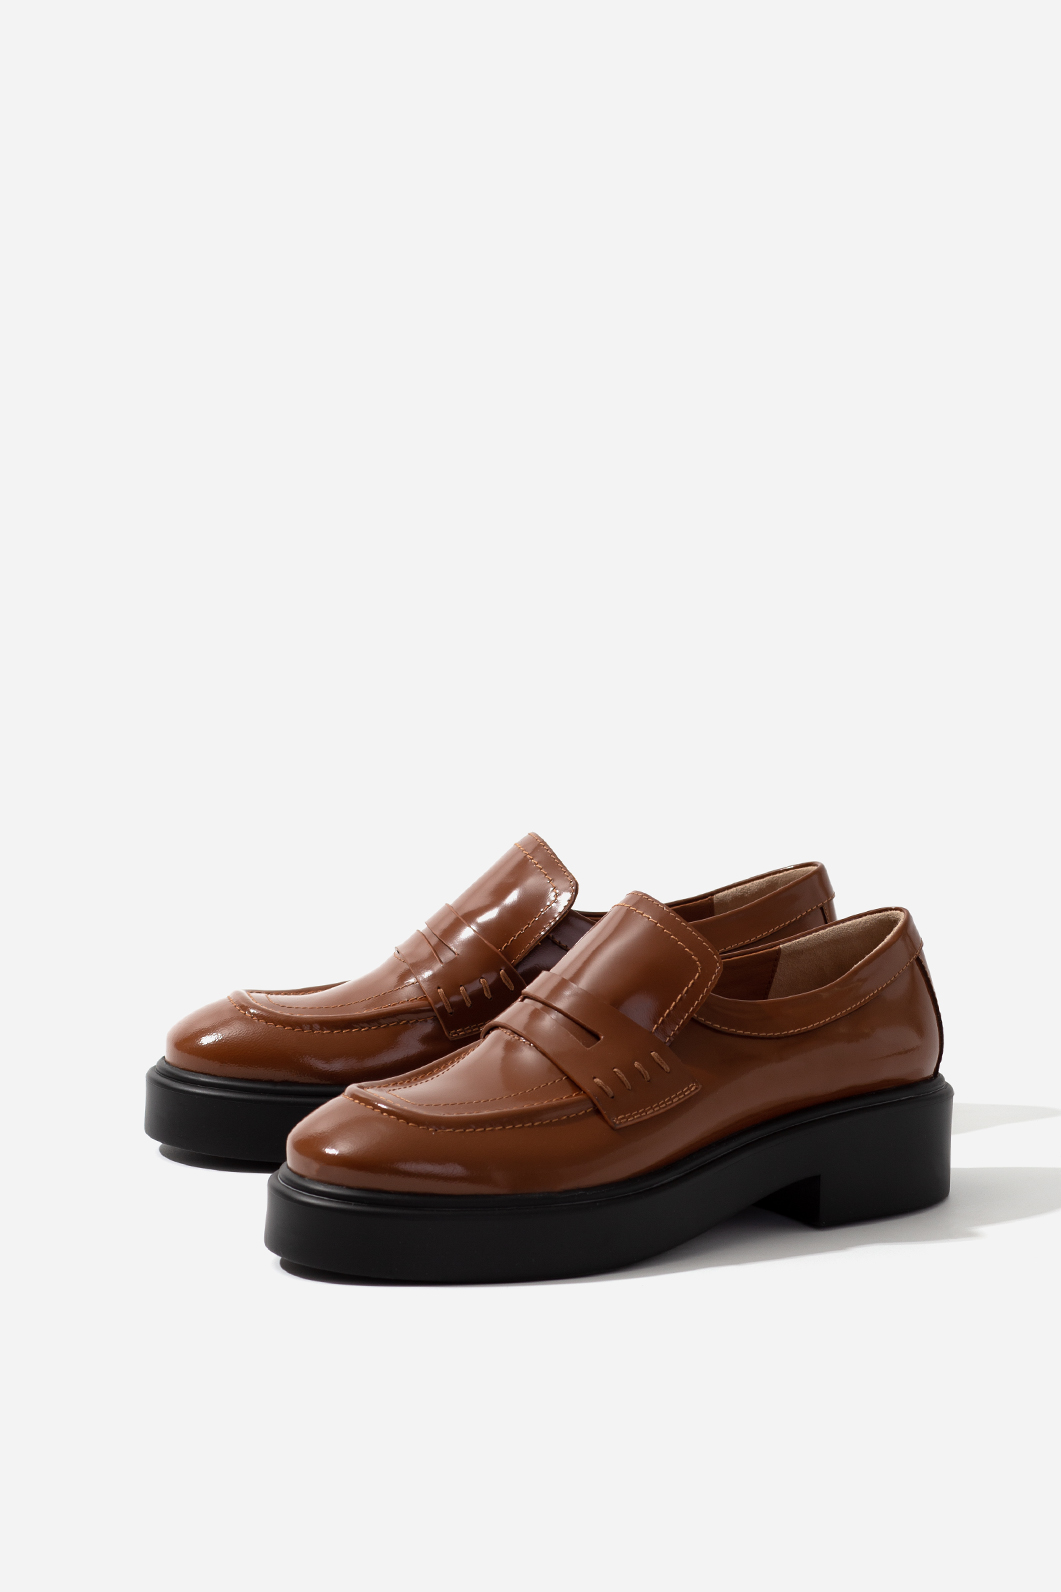 Cameron brown shiny leather loafers